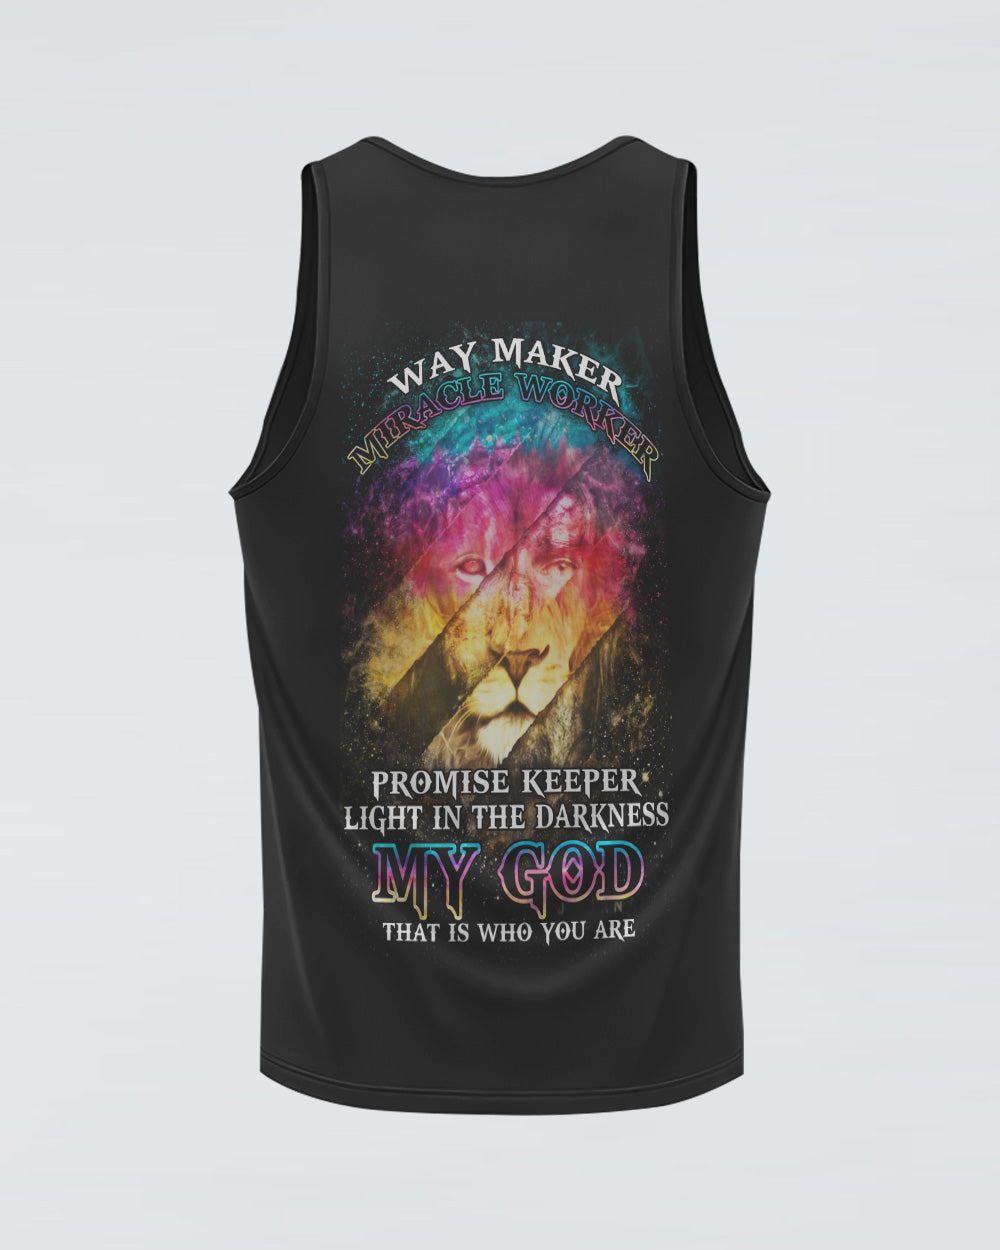 Way Maker Miracle Worker Lion Inside Art Colorful Women's Christian Tanks